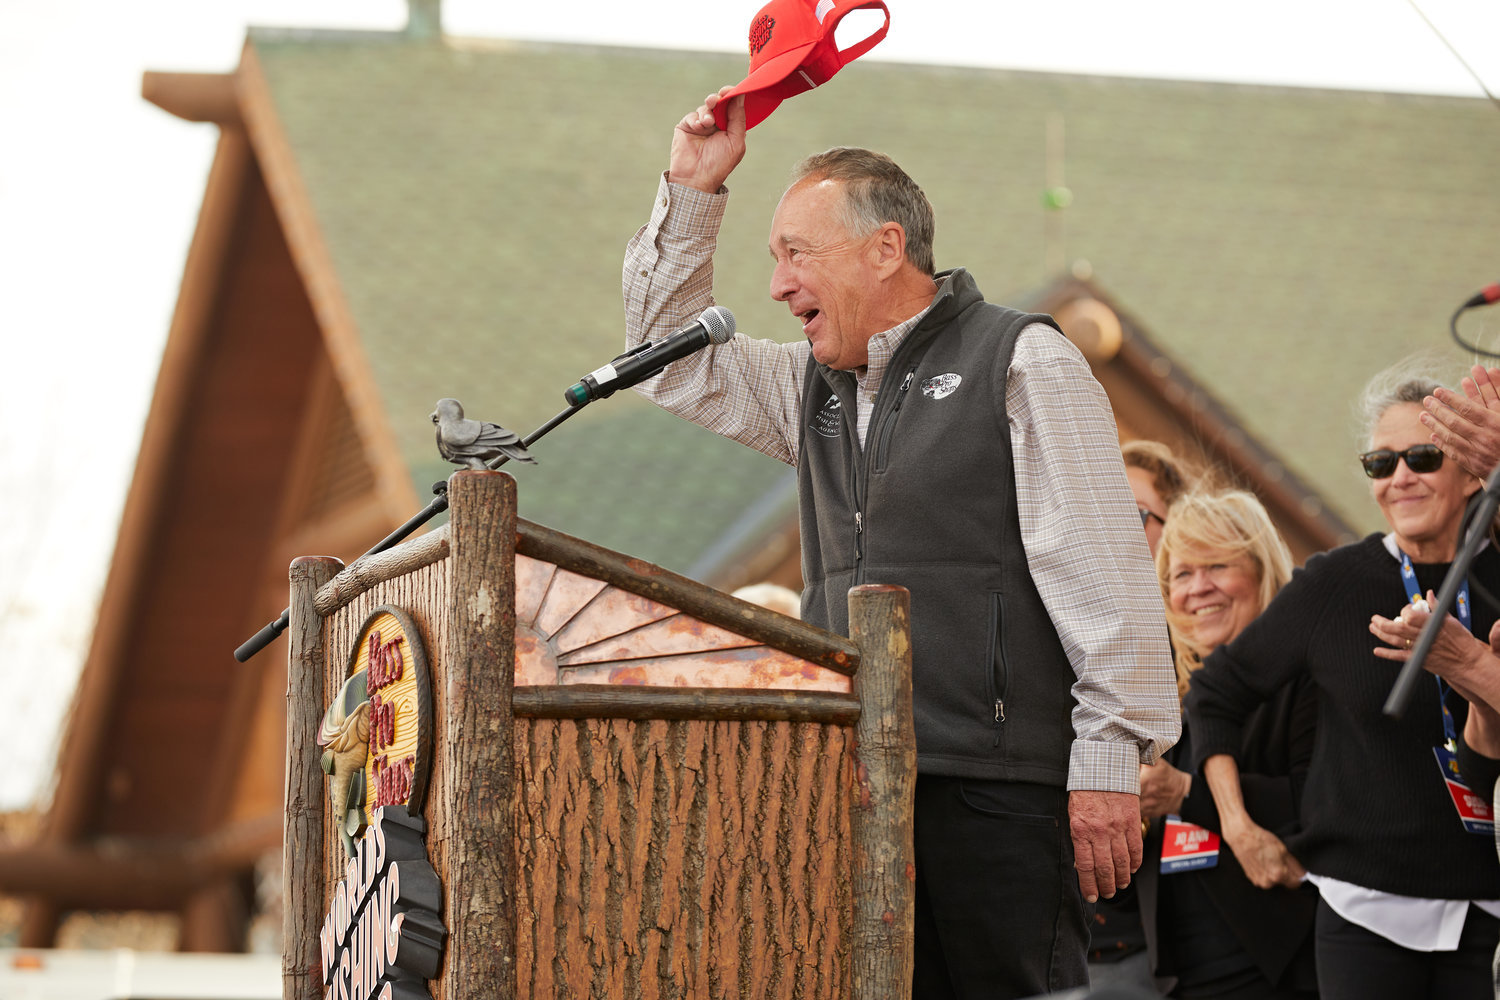 Bass Pro Shops founder Johnny Morris welcomes visitors to the World's Fishing Fair during a kickoff ceremony last month.